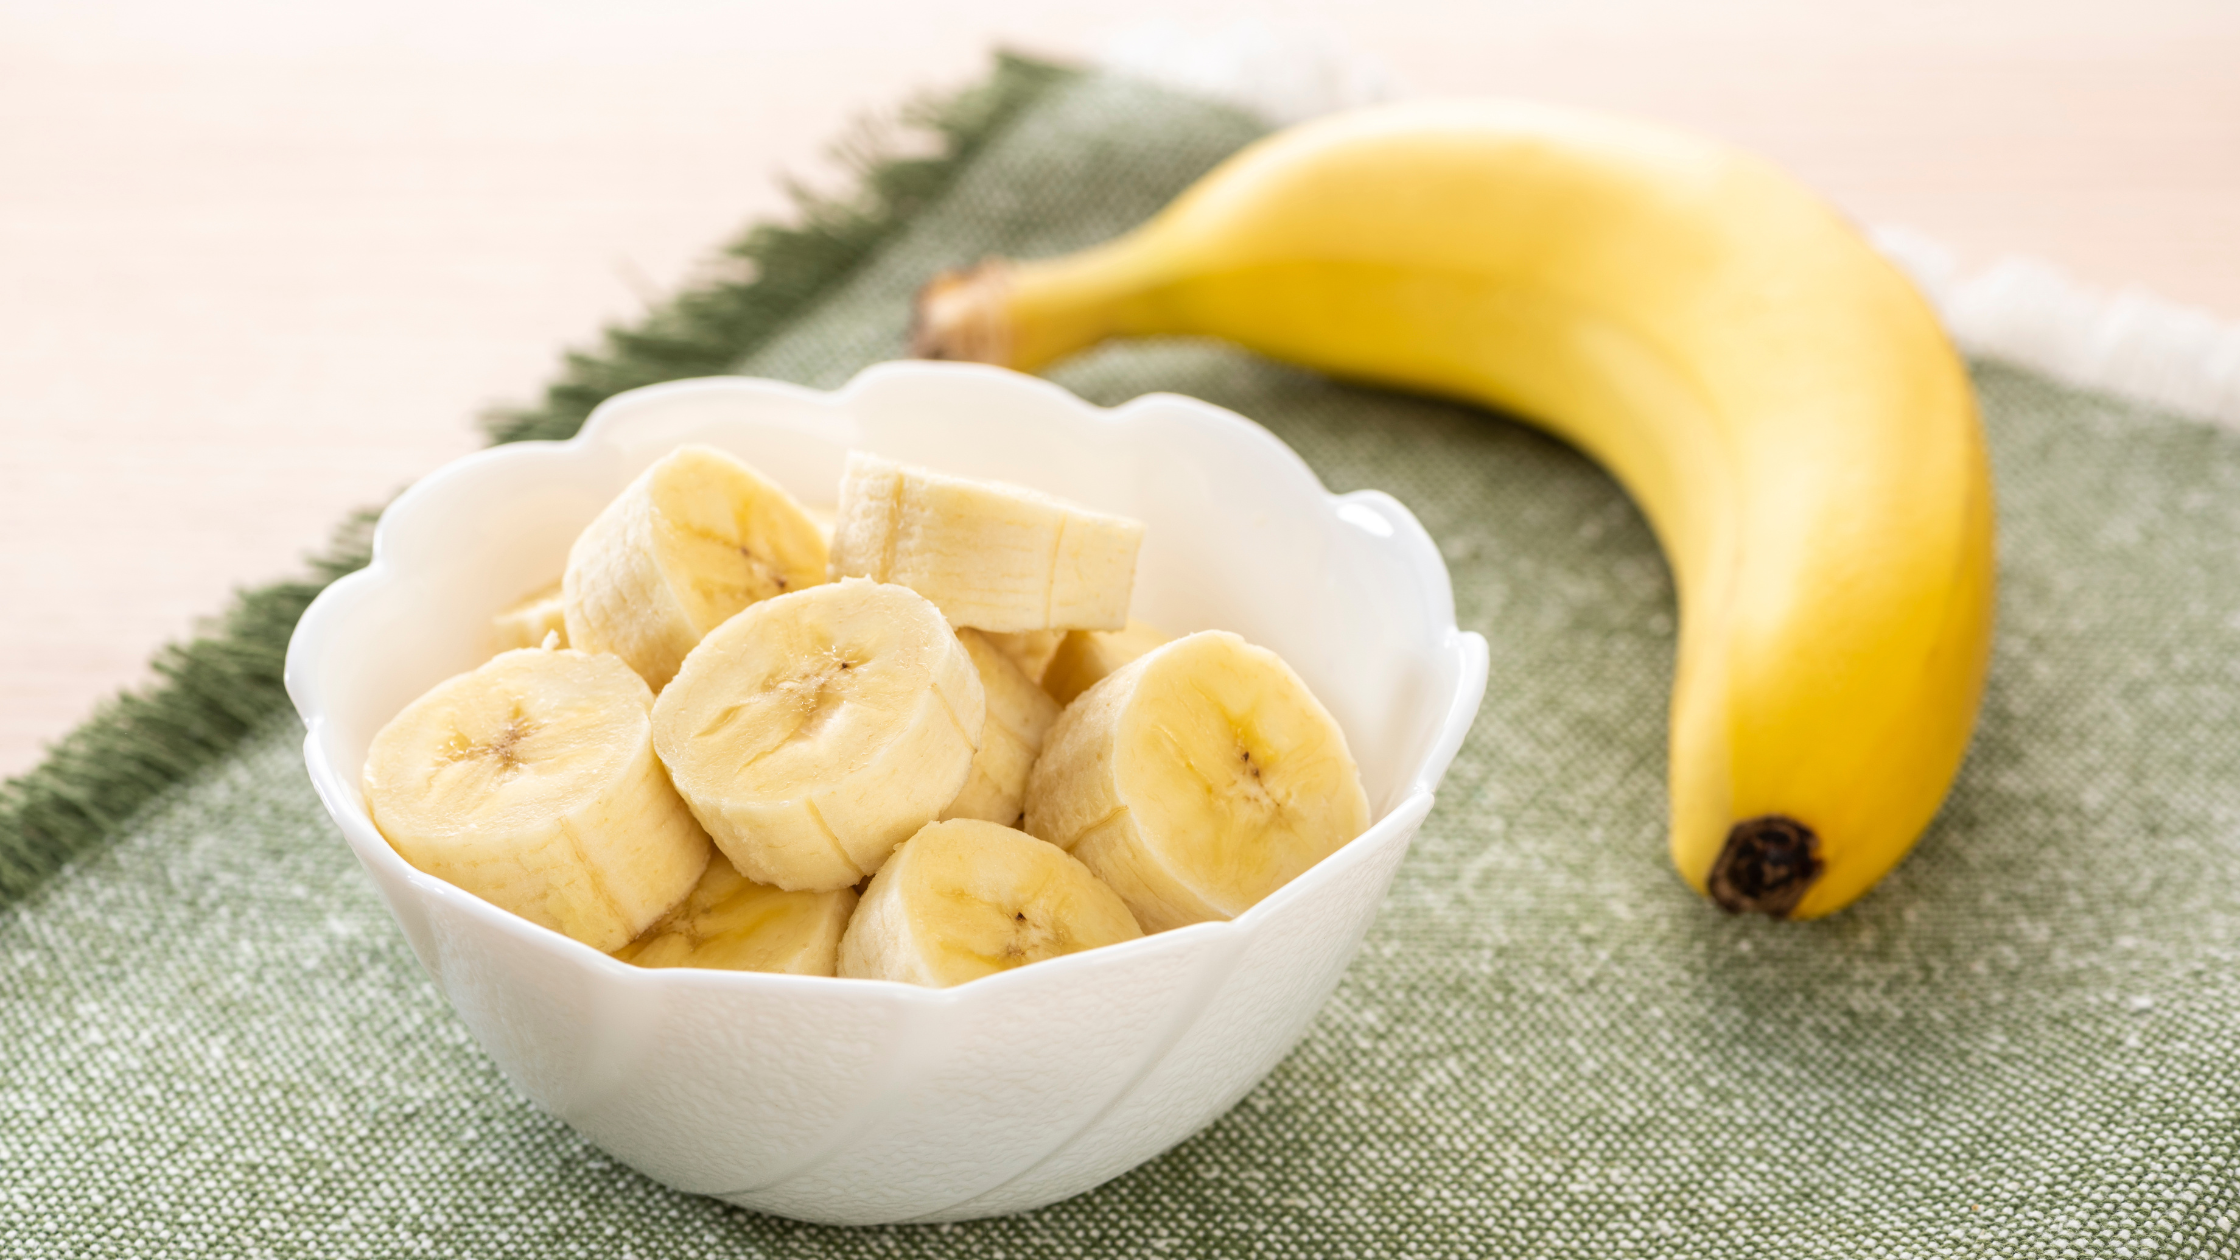 Are Bananas Good For Constipation